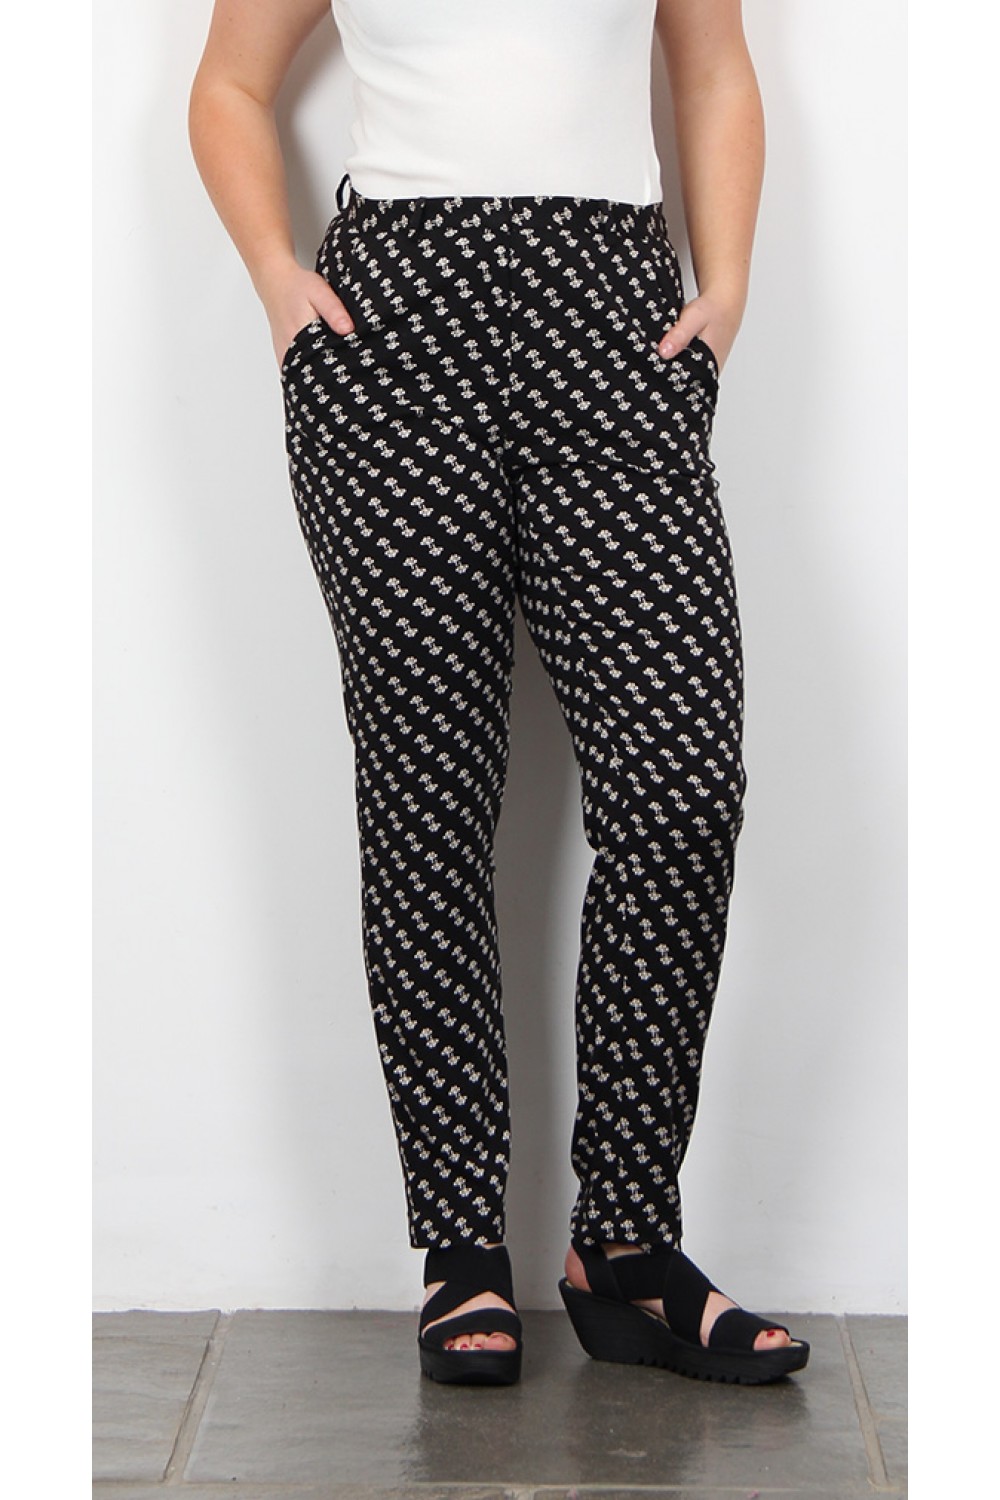 Zilch Clothing Trouser Floral Black White